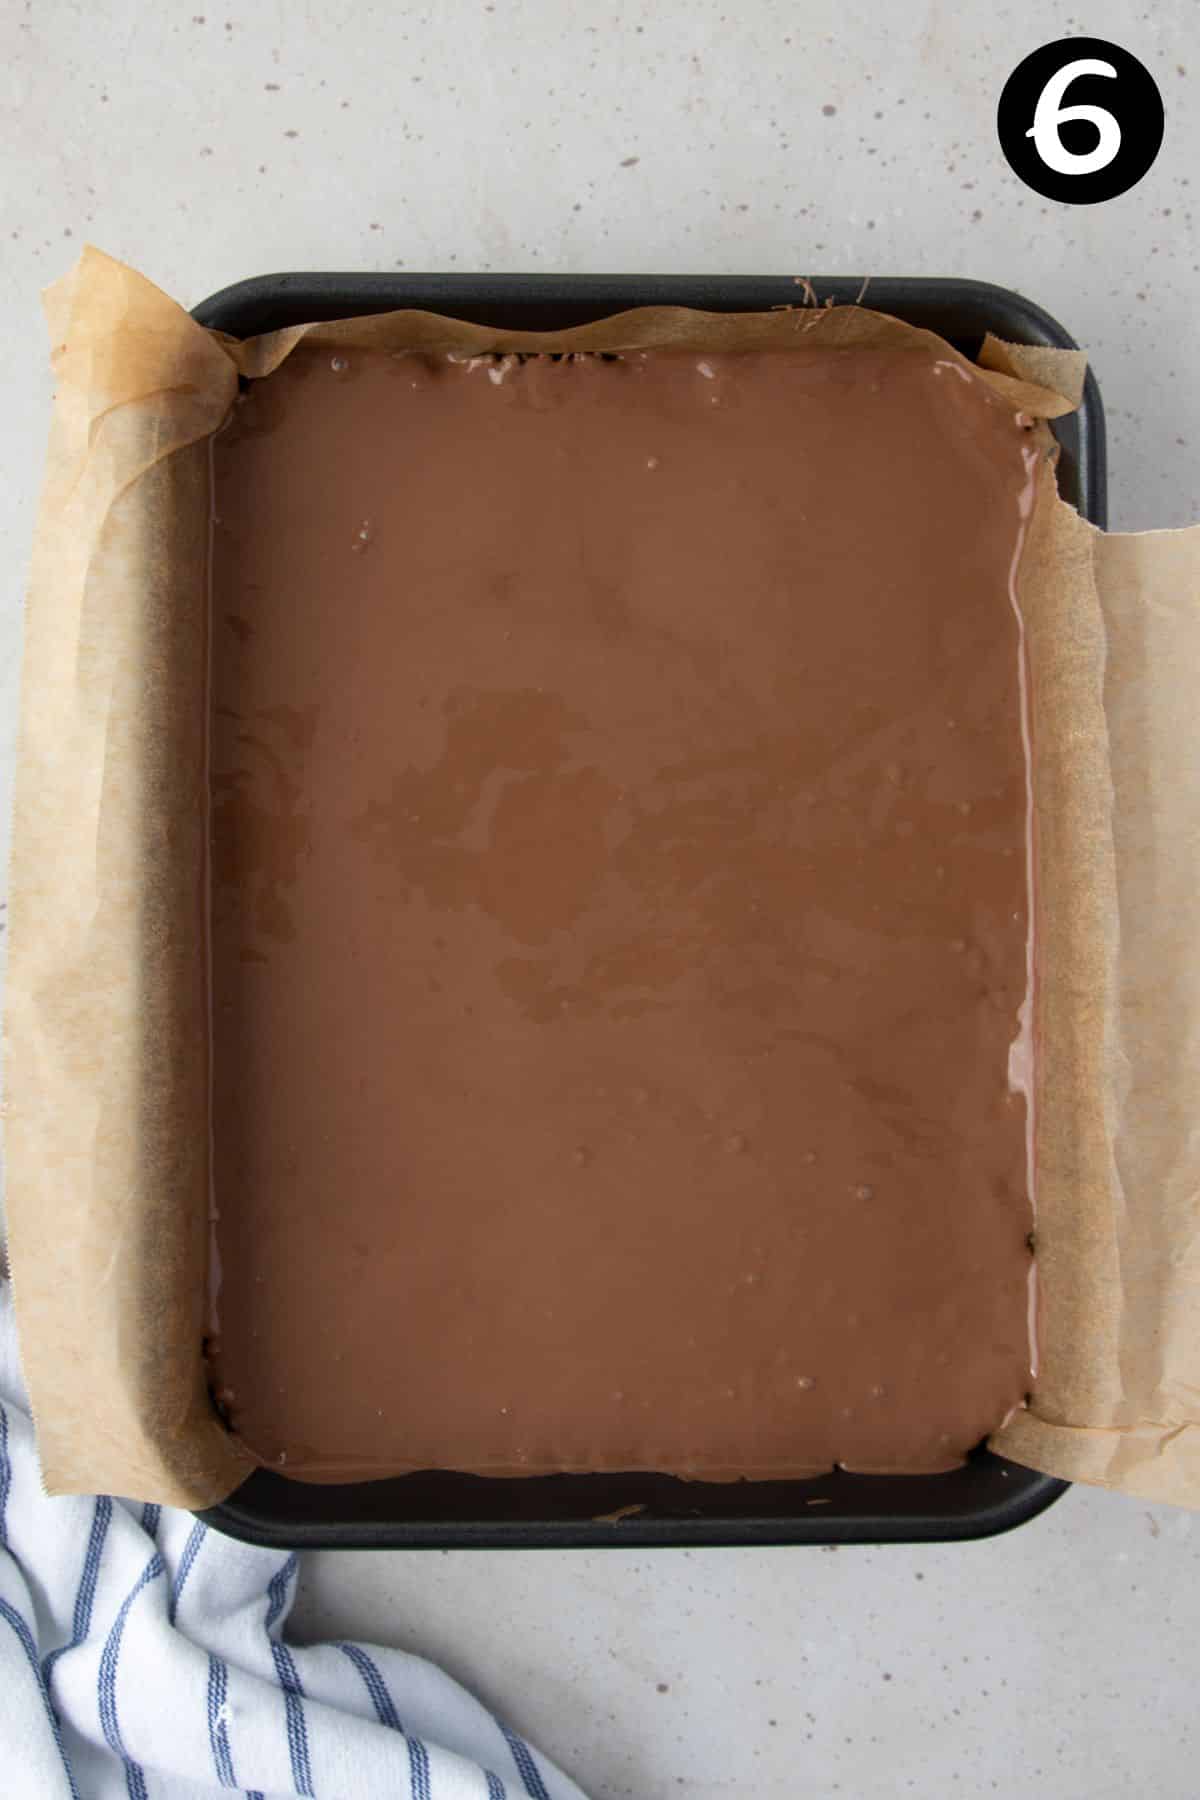 melted chocolate poured over slice in a tin lined with baking paper.